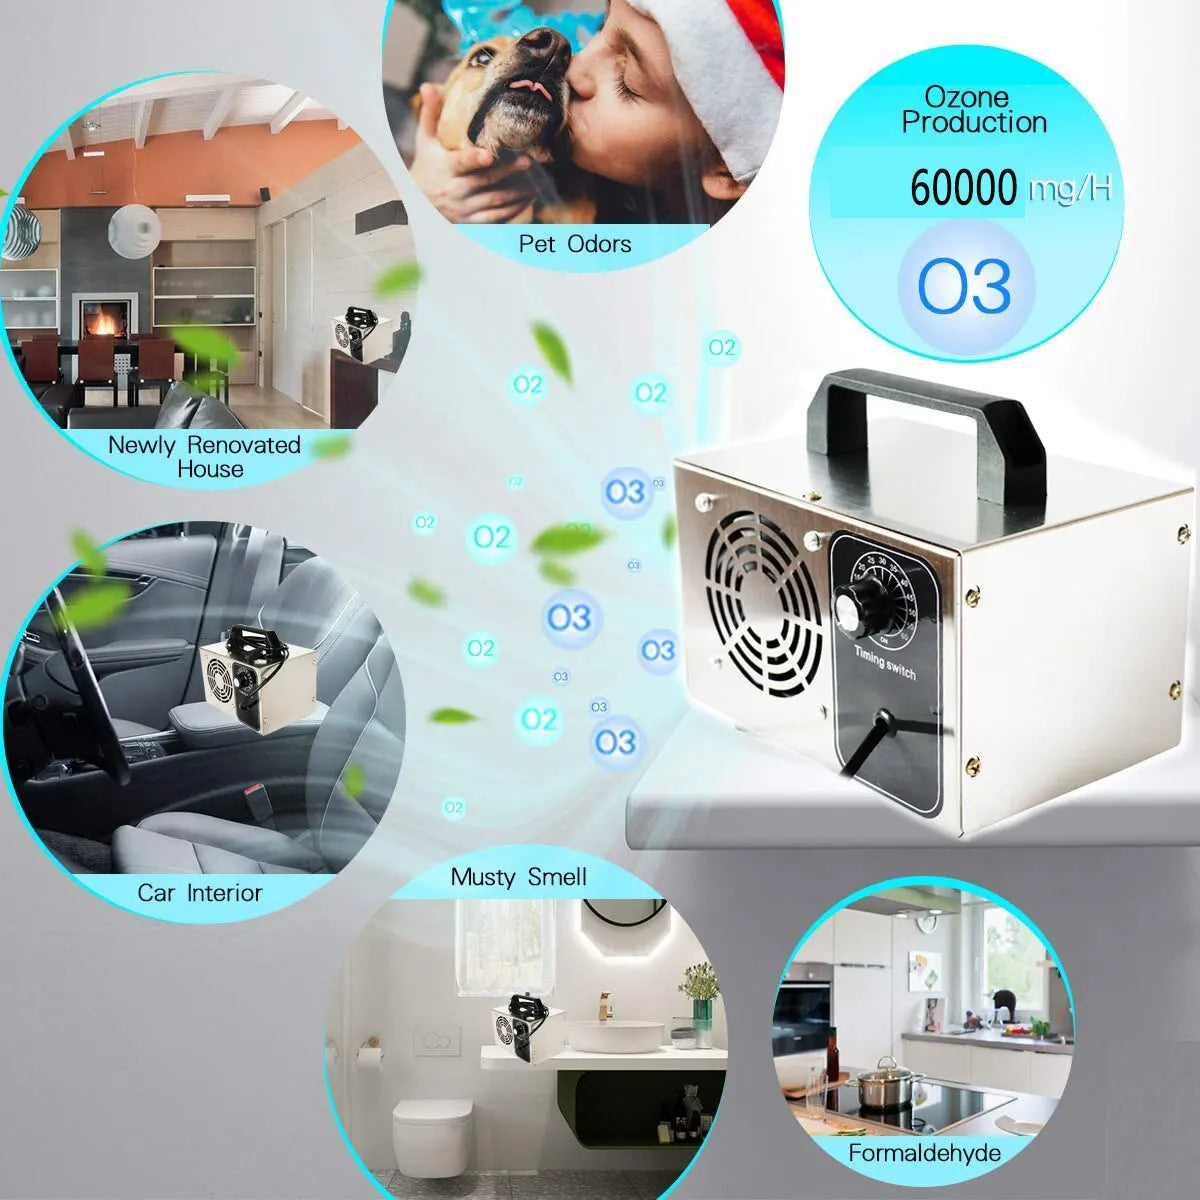 Air Purifier Ozone Generator 220V 60g Air Cleaner Ozono Disinfection Sterilization Ozonizer Cleaning Formaldehy